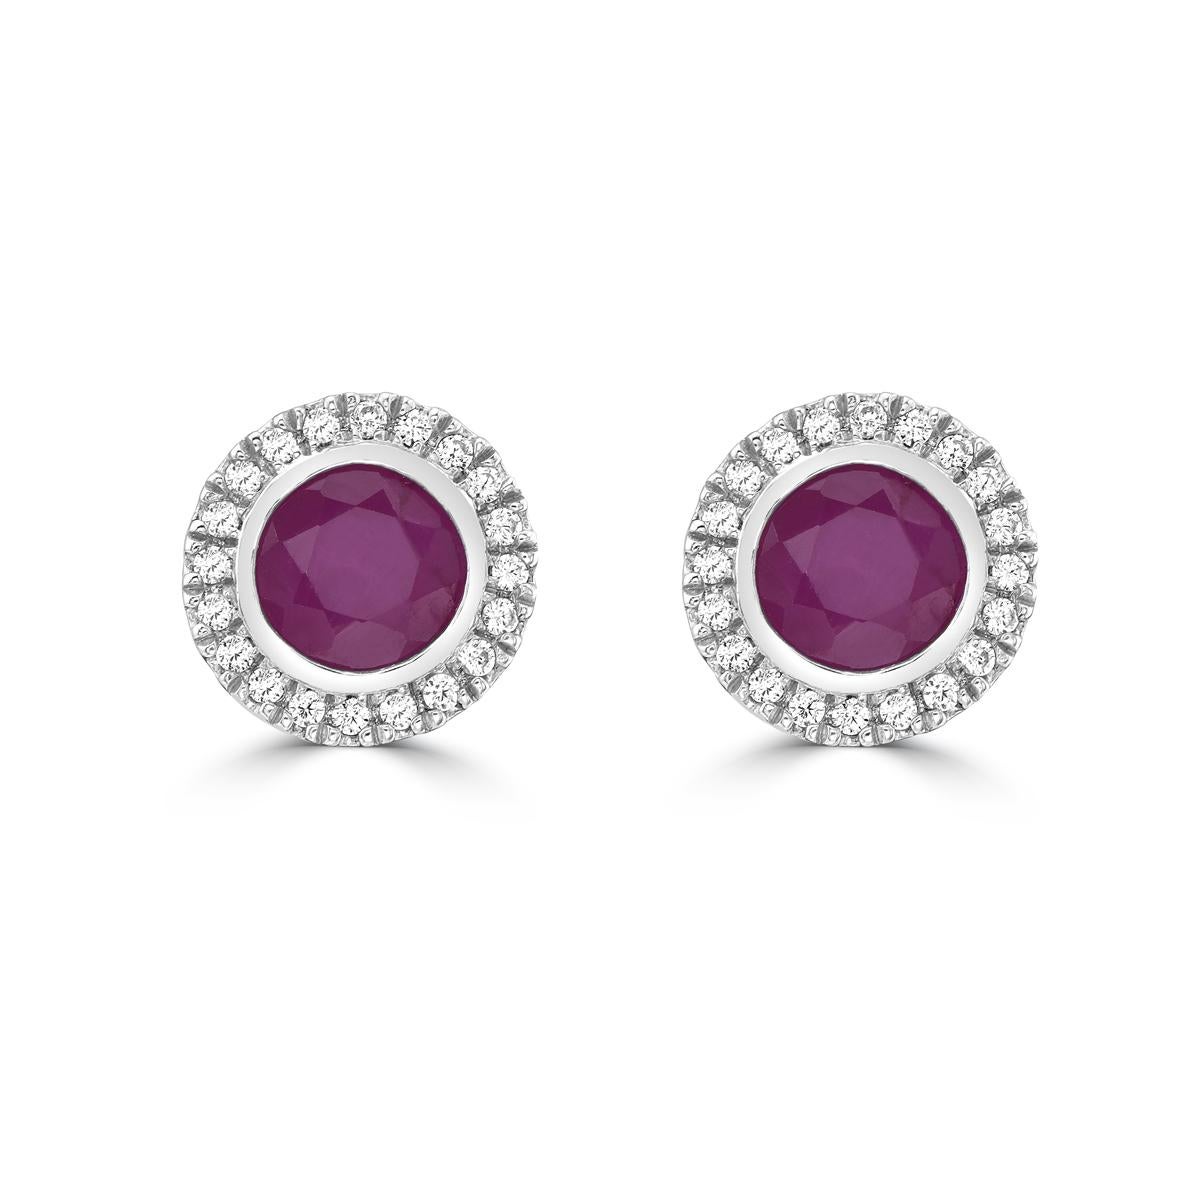 Indulge in luxury with our Ruby and Diamond Halo Stud Earrings in 14K White Gold. Featuring stunning round rubies, these ruby stud earrings exude sophistication and exclusivity. The dazzling halo design with accompanying diamonds adds an elegant